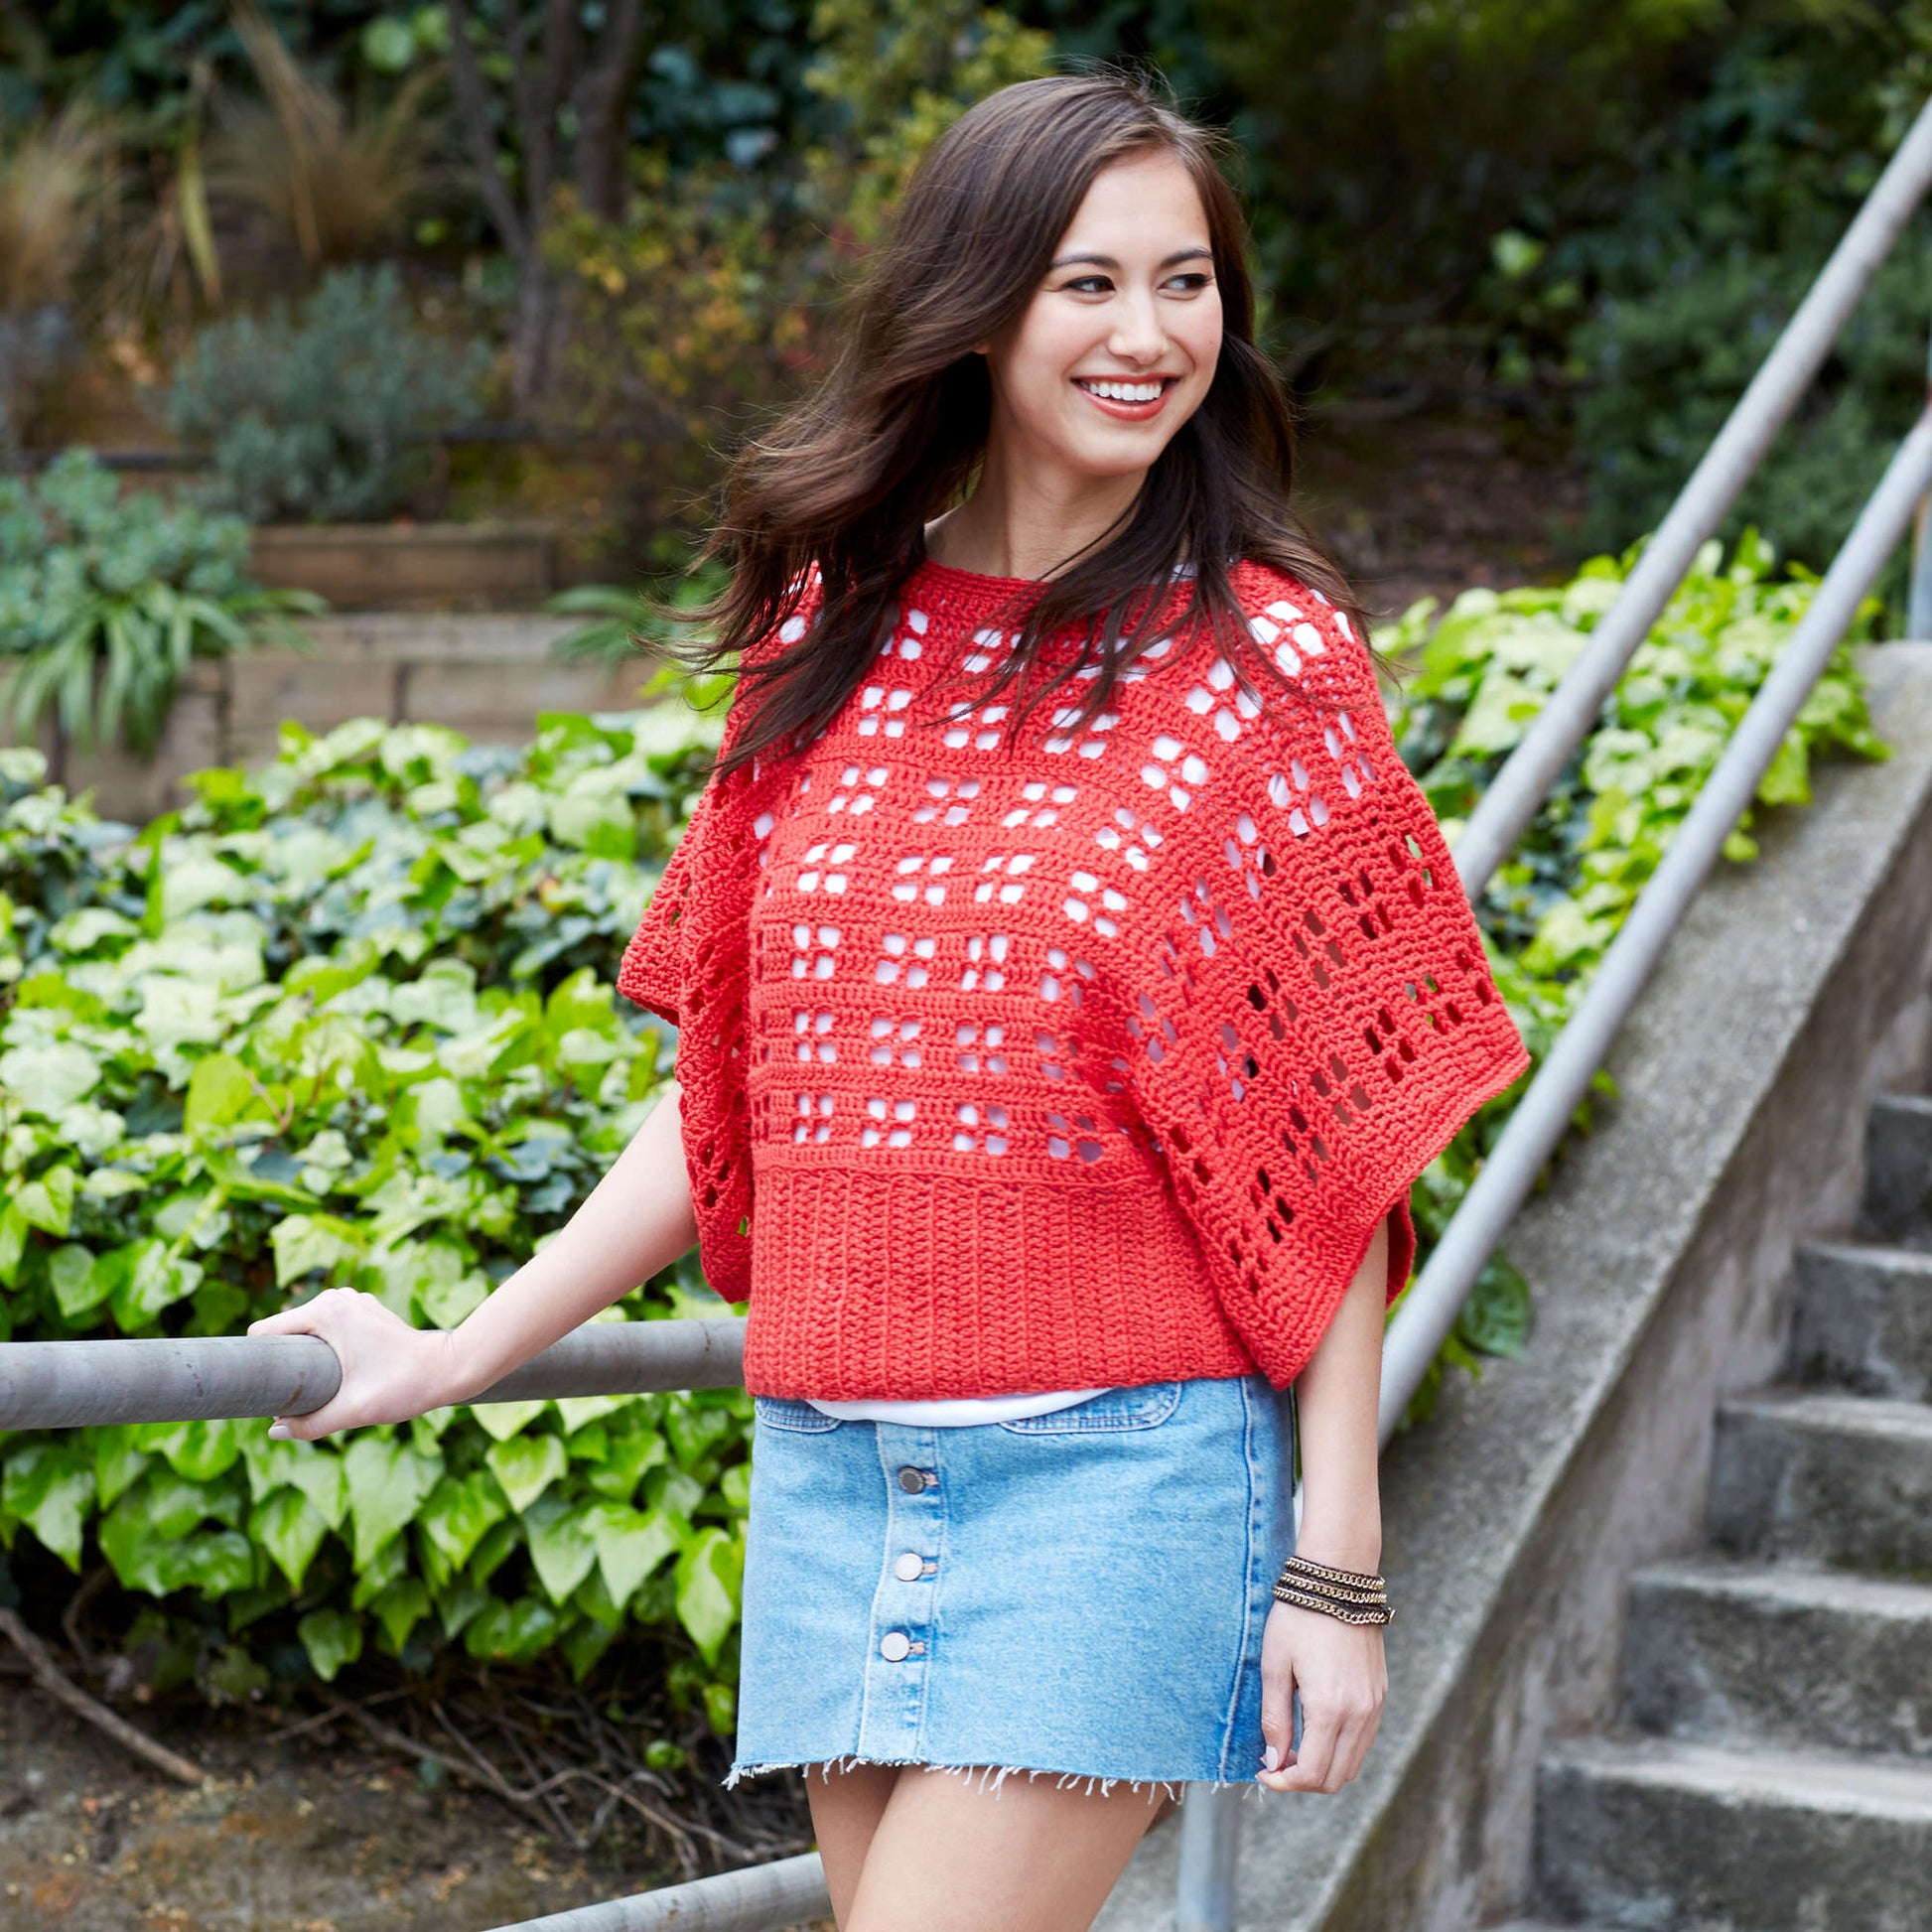 Free Red Heart Clementine Chic Sweater Crochet Pattern